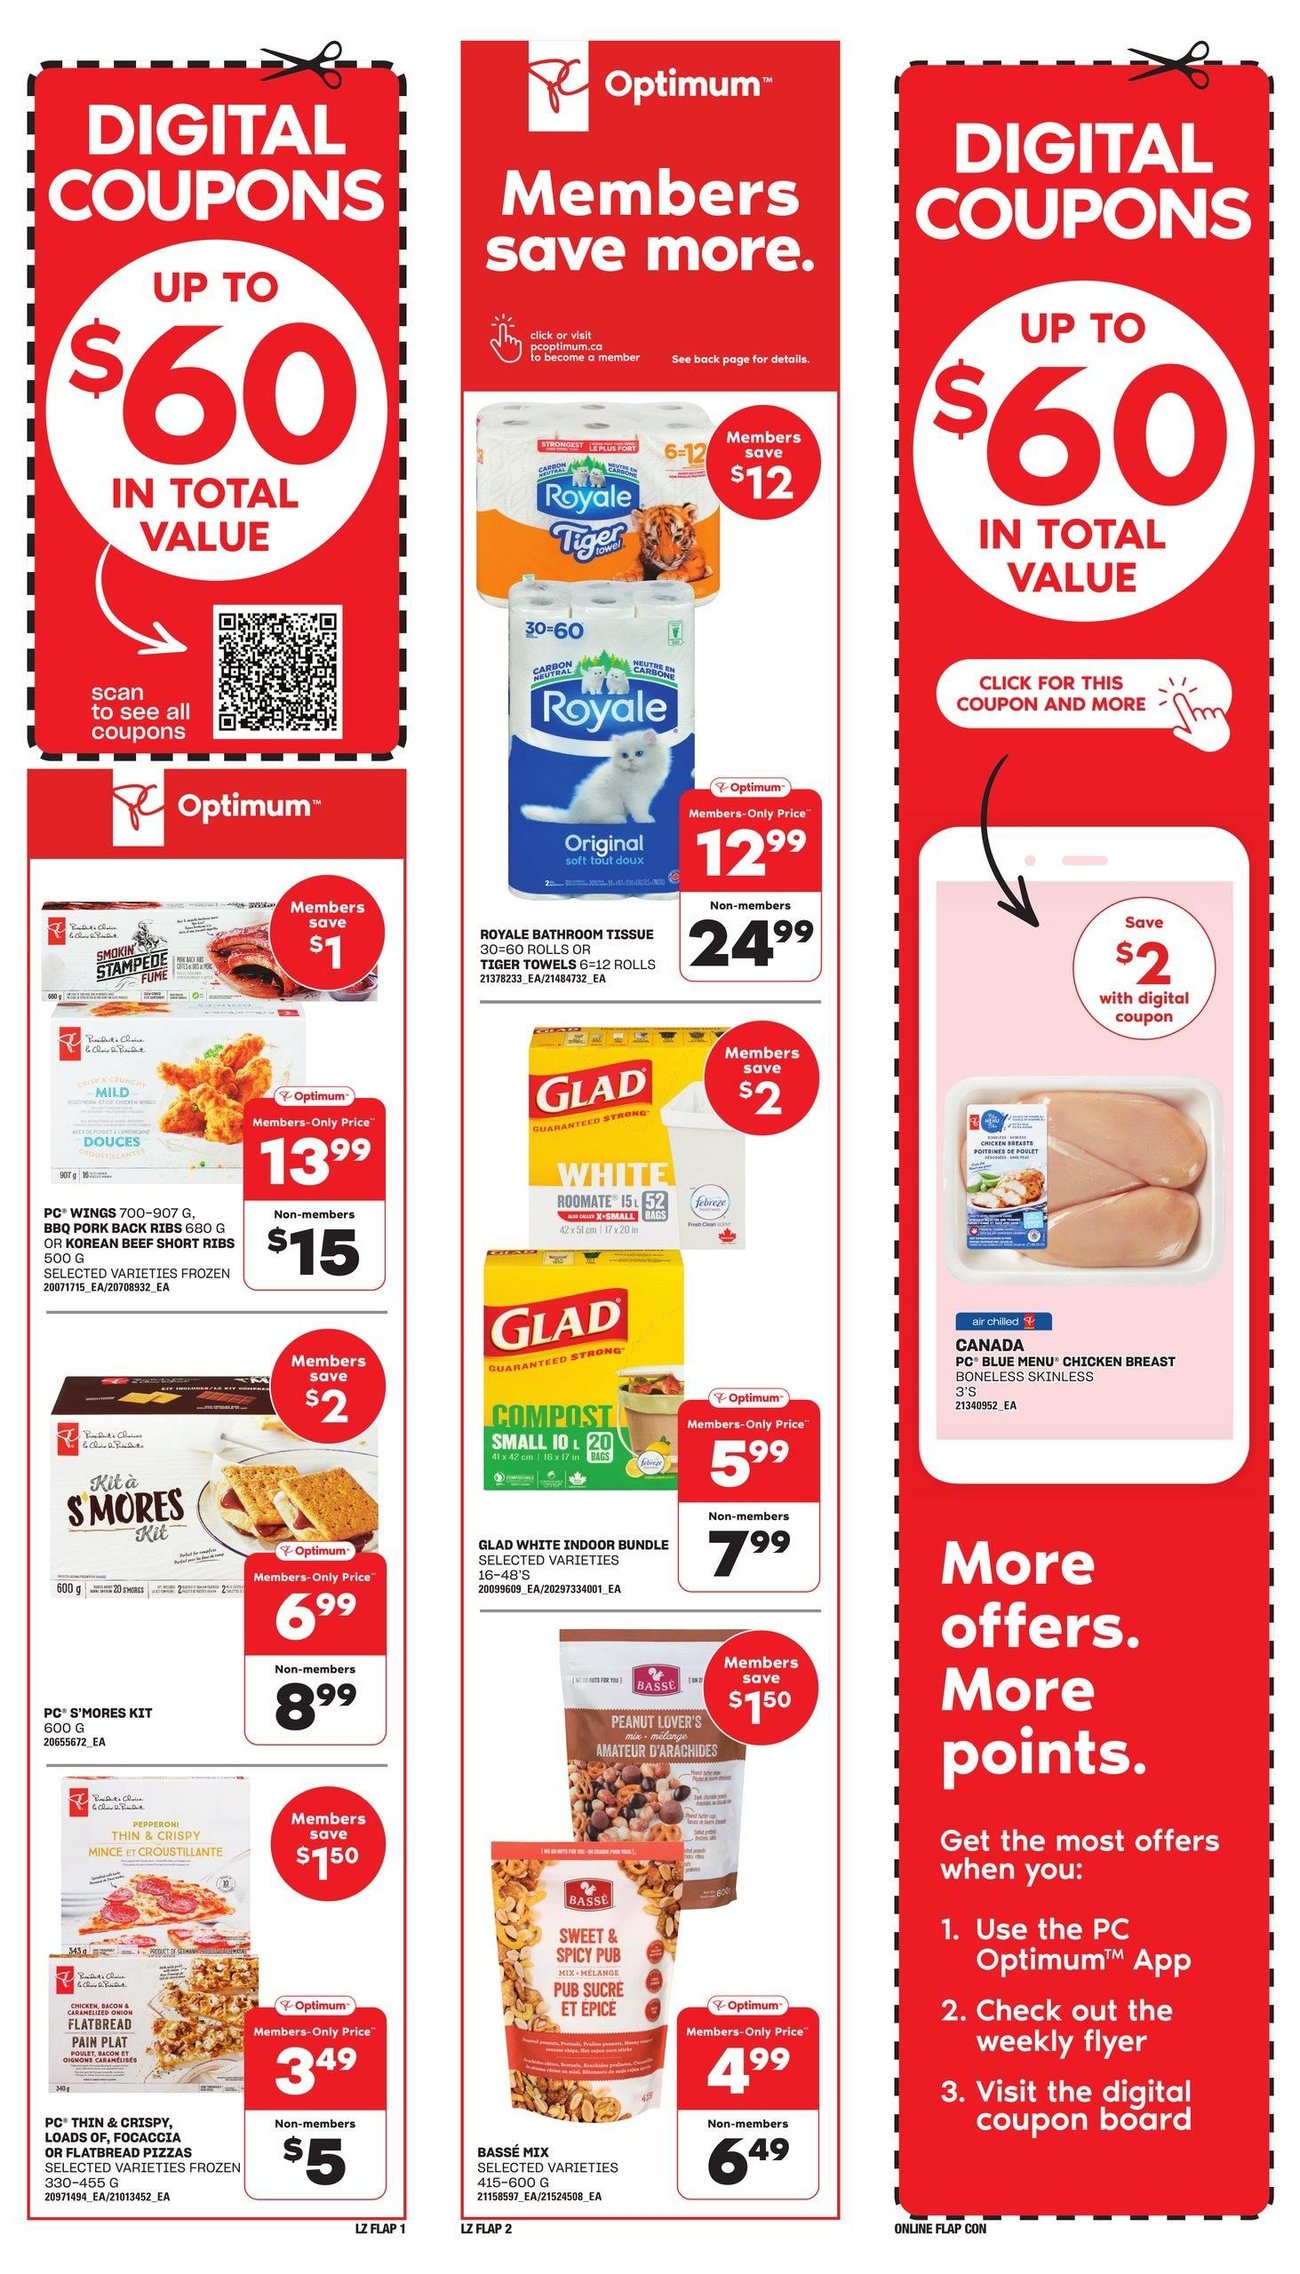 Zehrs - Weekly Flyer Specials - Page 2